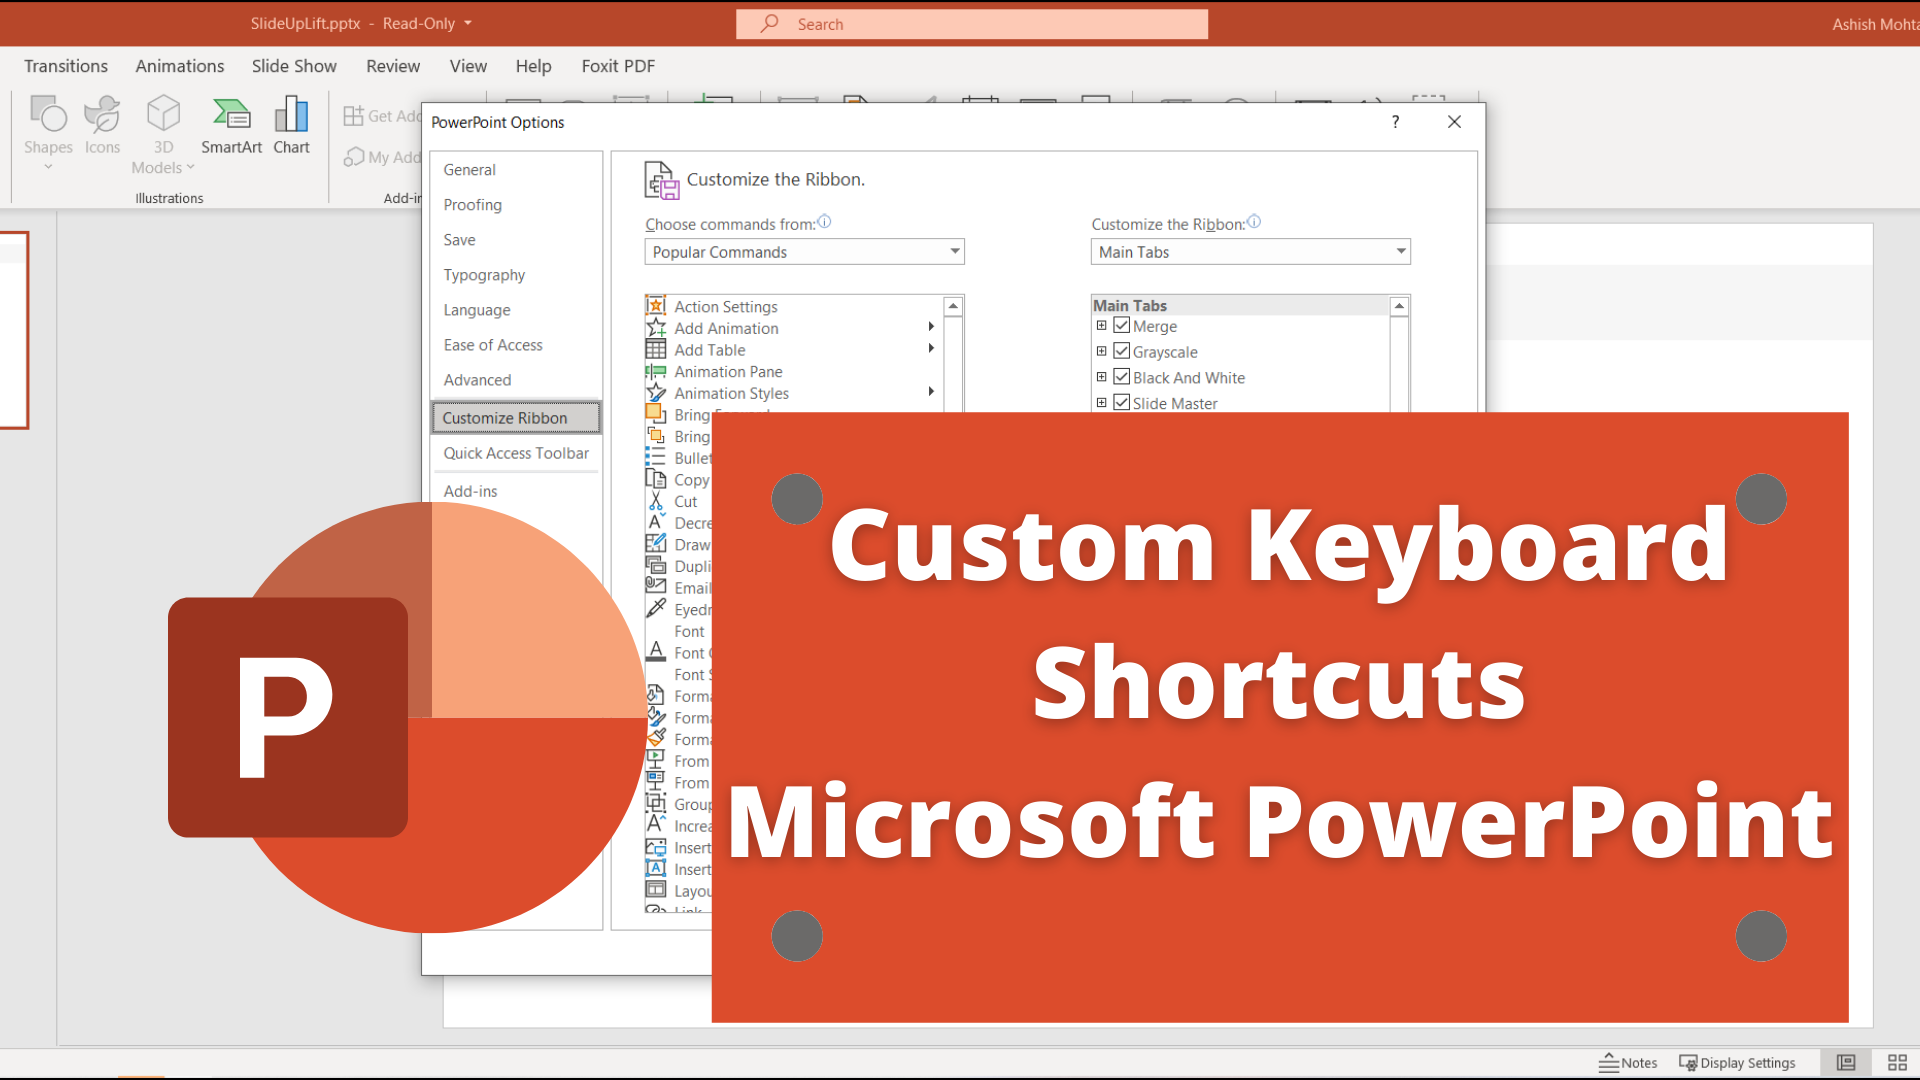 How to Create Custom Shortcuts for Microsoft Office PowerPoint